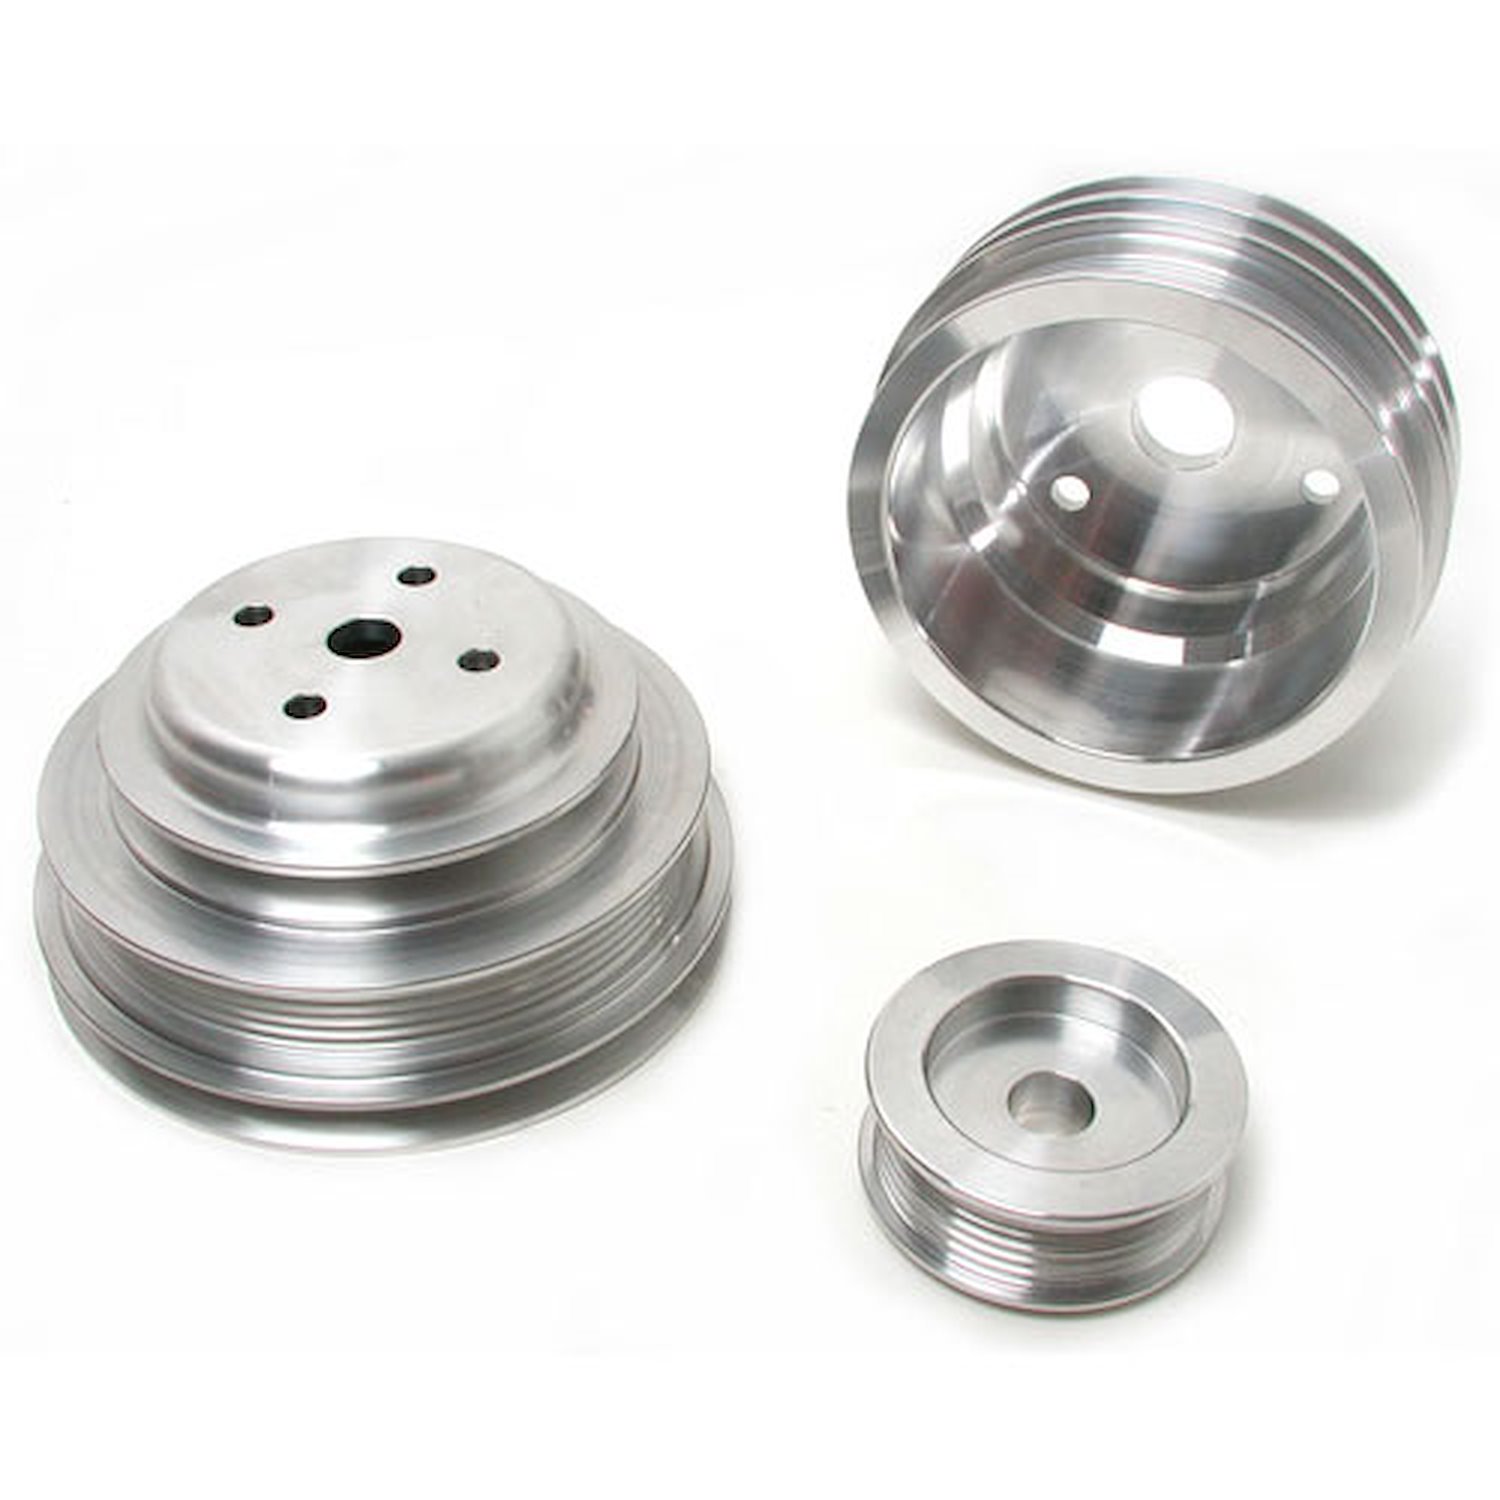 3-Piece Aluminum Underdrive Pulley Kit 1985-87 Monte Carlo, GM Truck 305/350